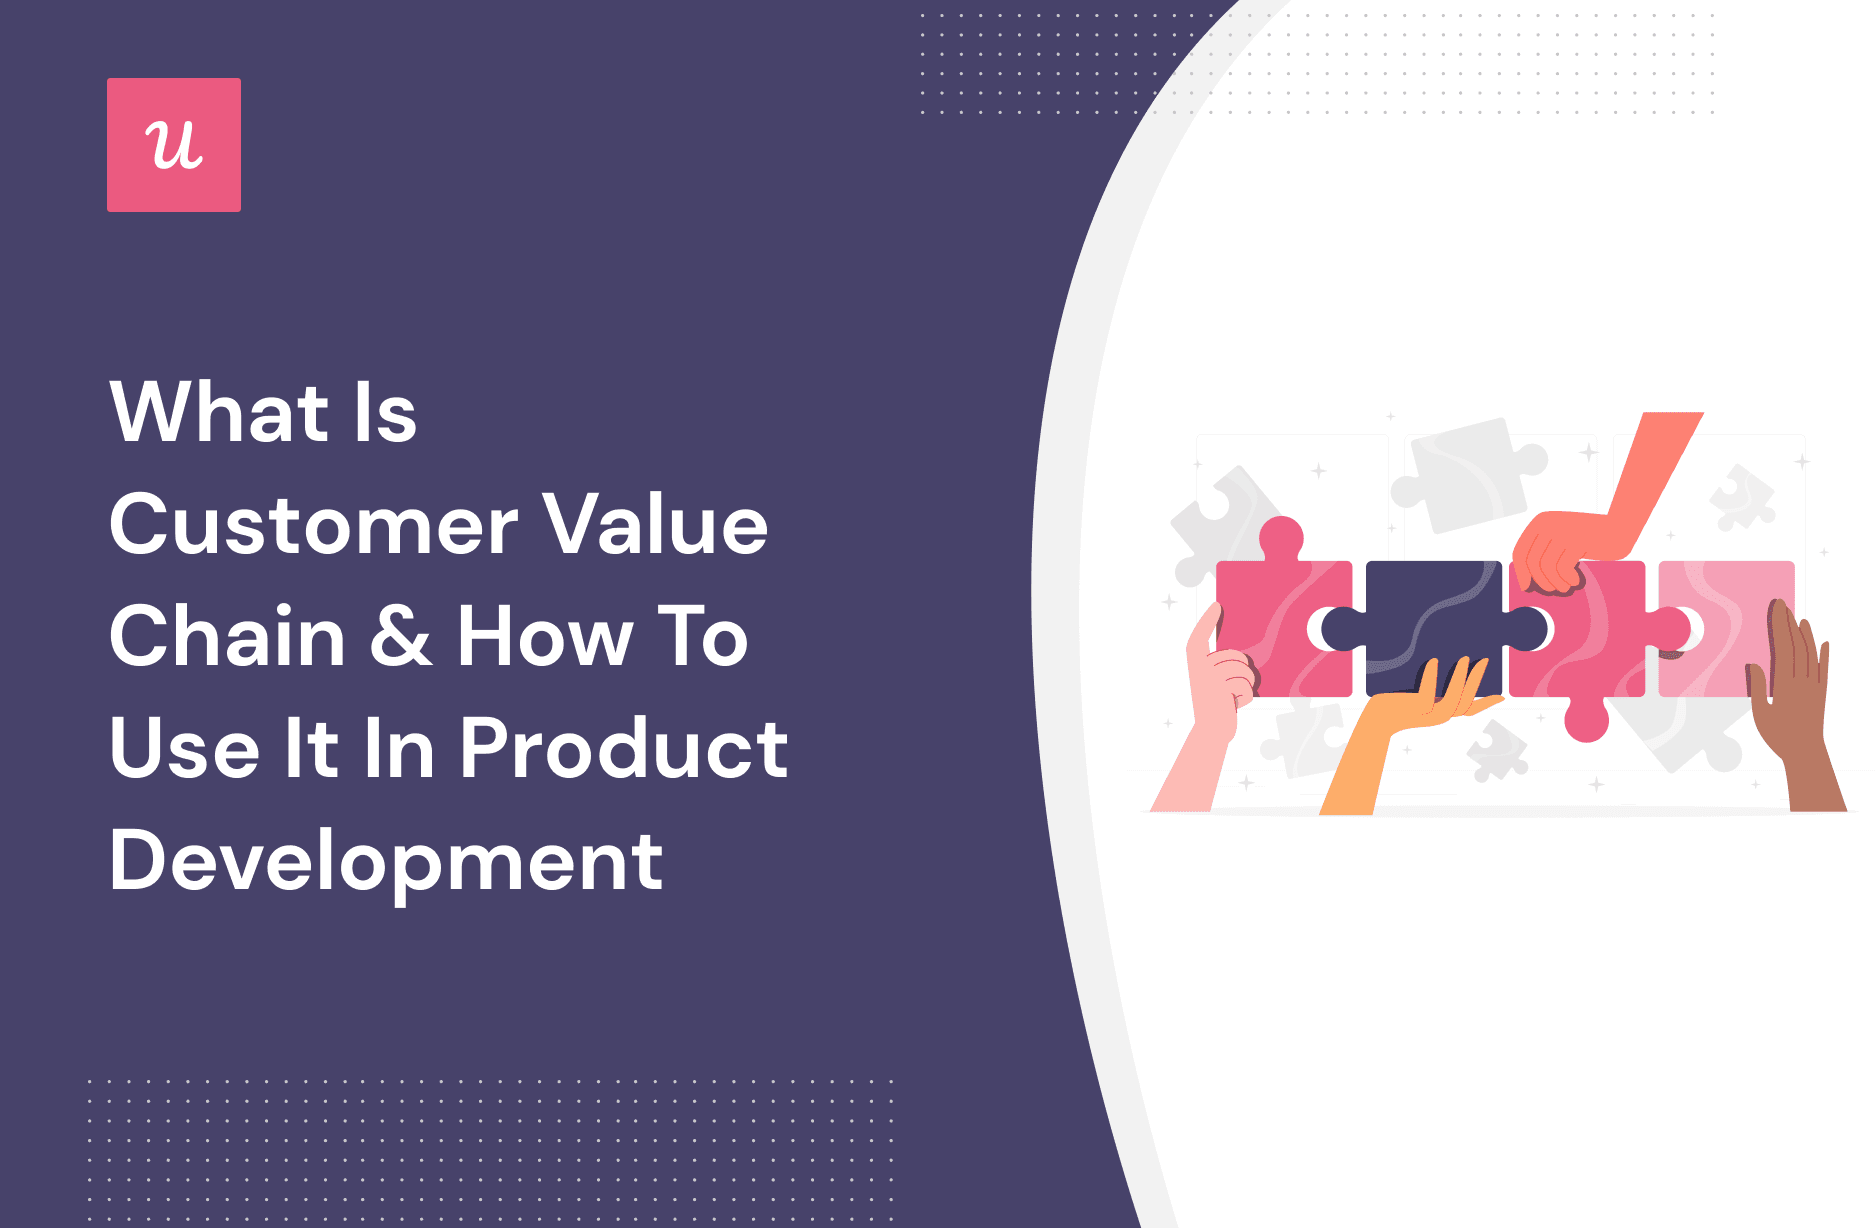 What is Customer Value Chain & How to Use It in Product Development cover